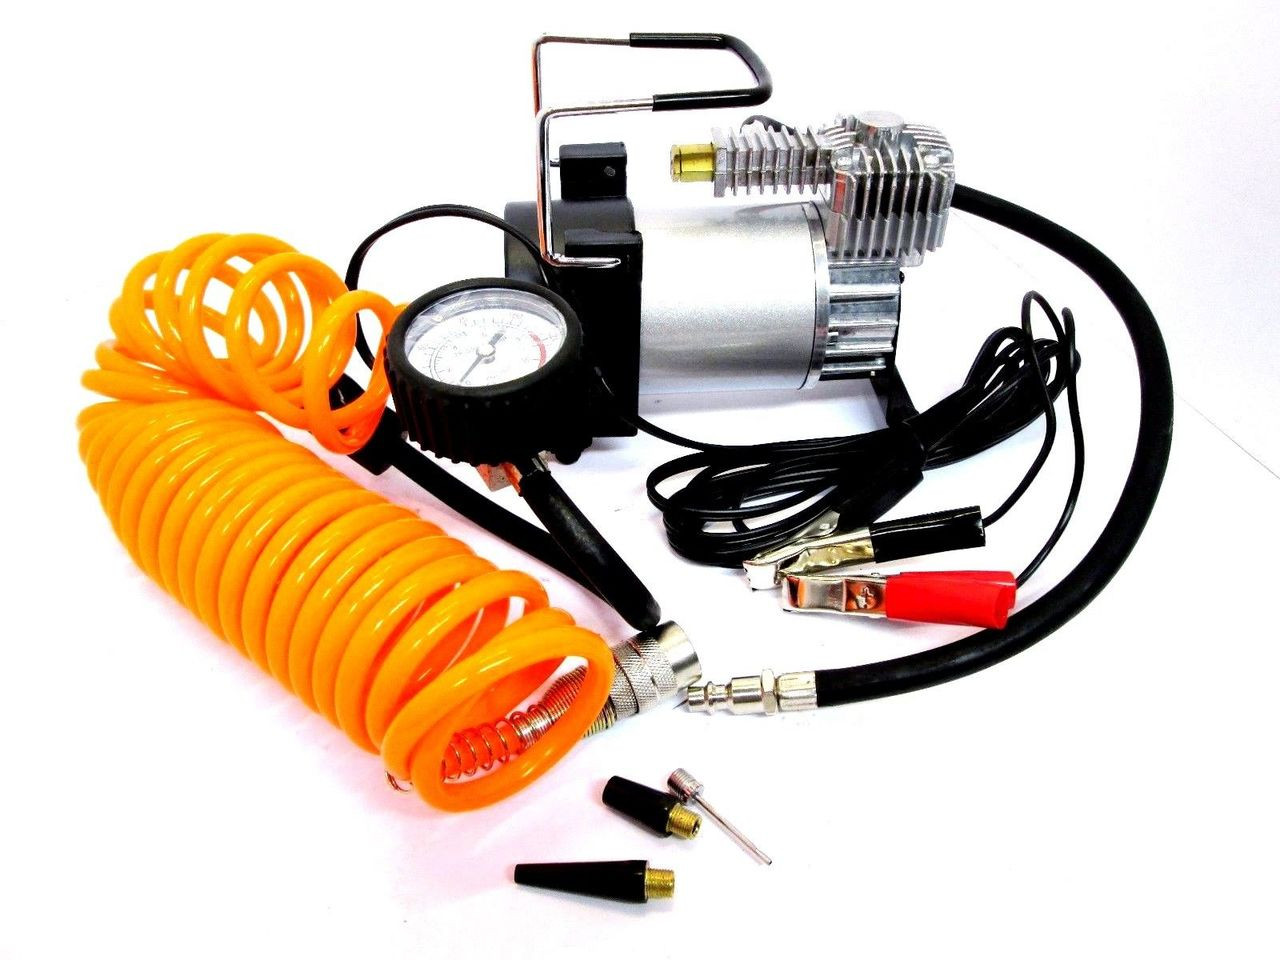 Portable Air Compressor Tyre Inflator 12v Heavy Duty Electric Clip Battery AU034 